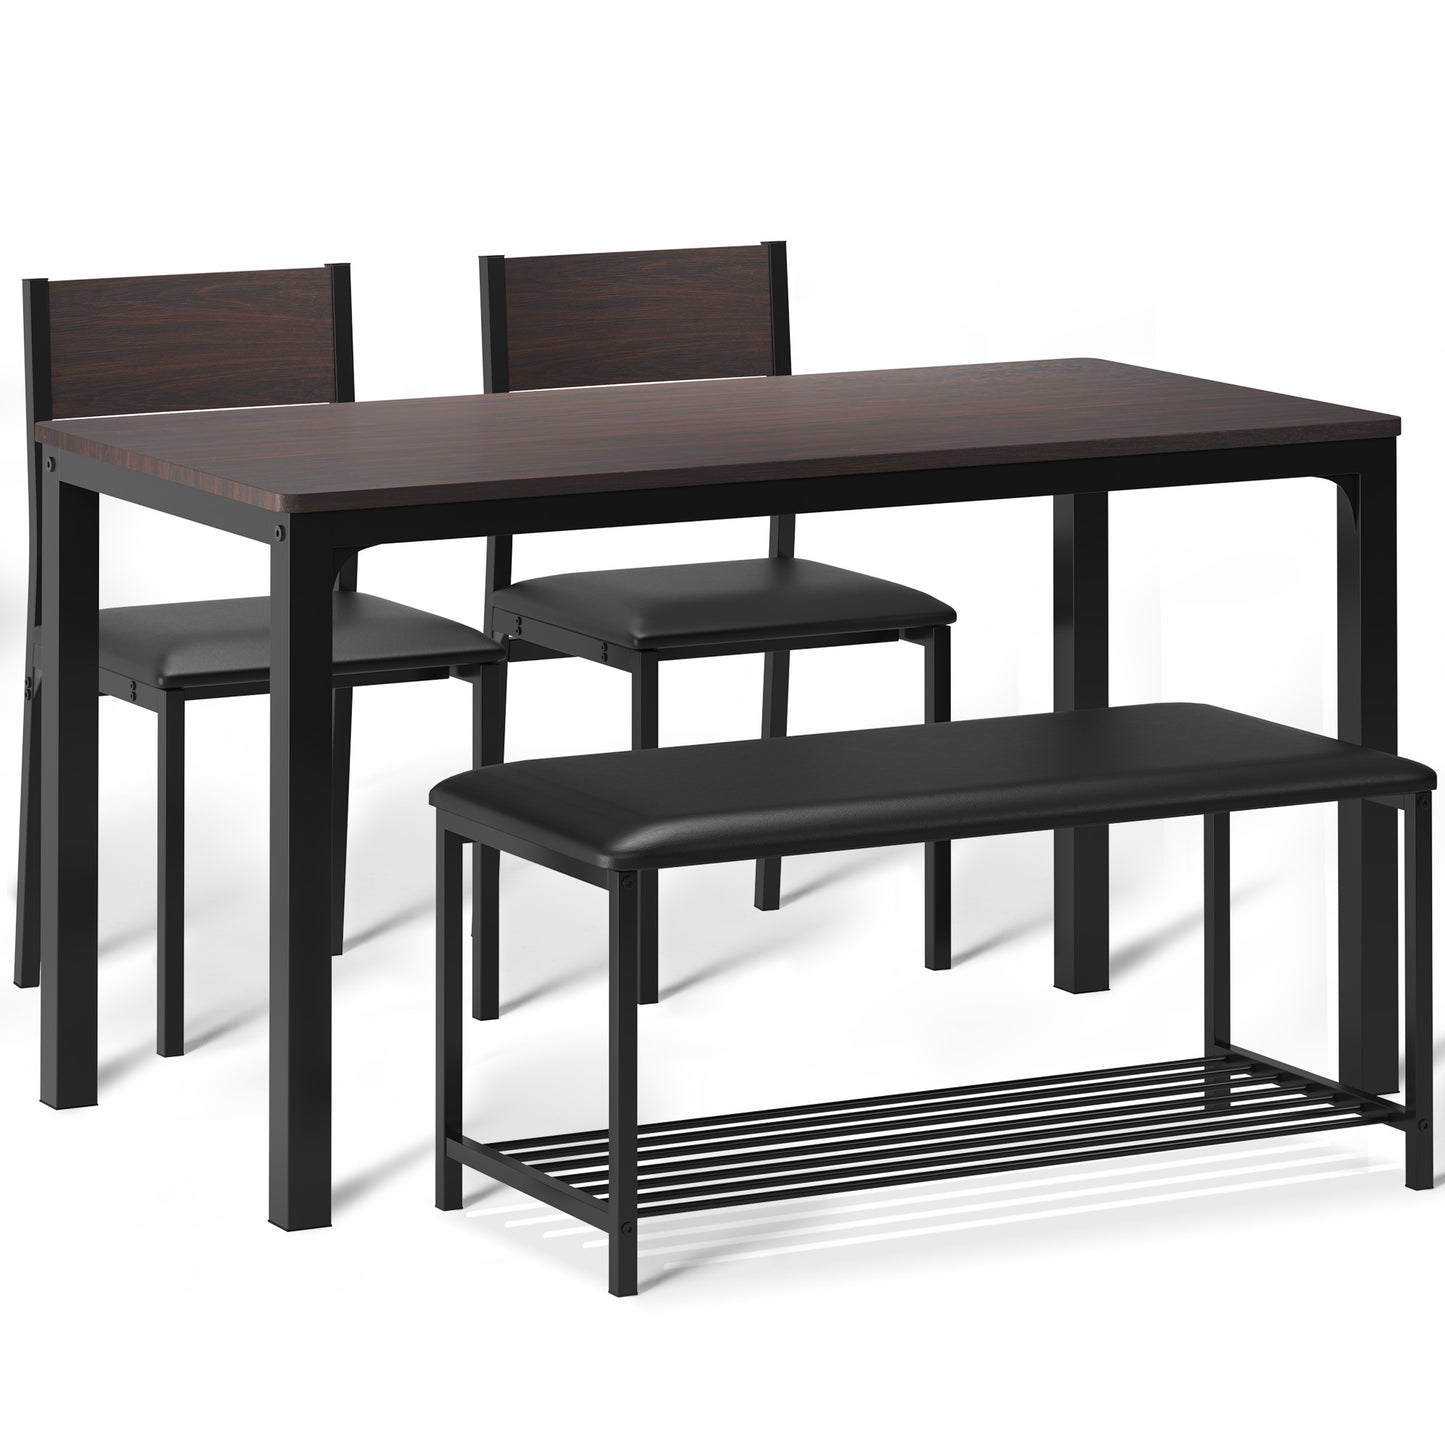 SogesPower Dining Table Set for 4, Kitchen Table with 2 Chairs and 1 Bench- Black Leather